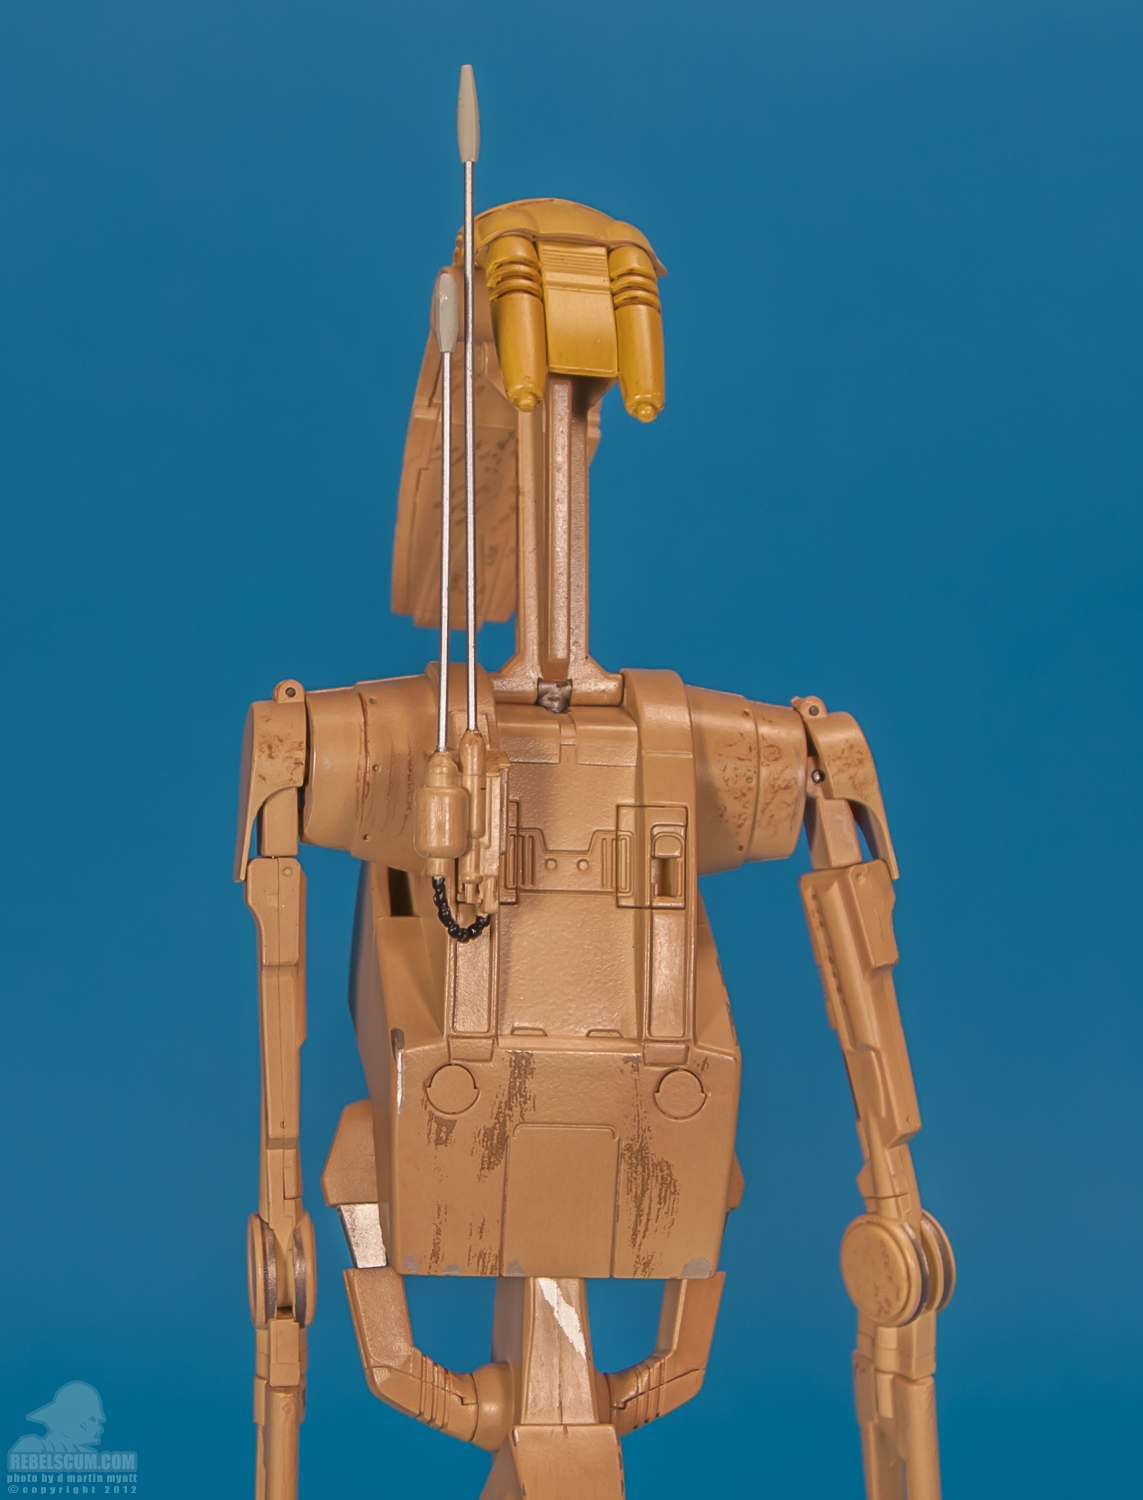 OOM-9_Battle_Droid_Commander_Sideshow_Collectibles-11.jpg